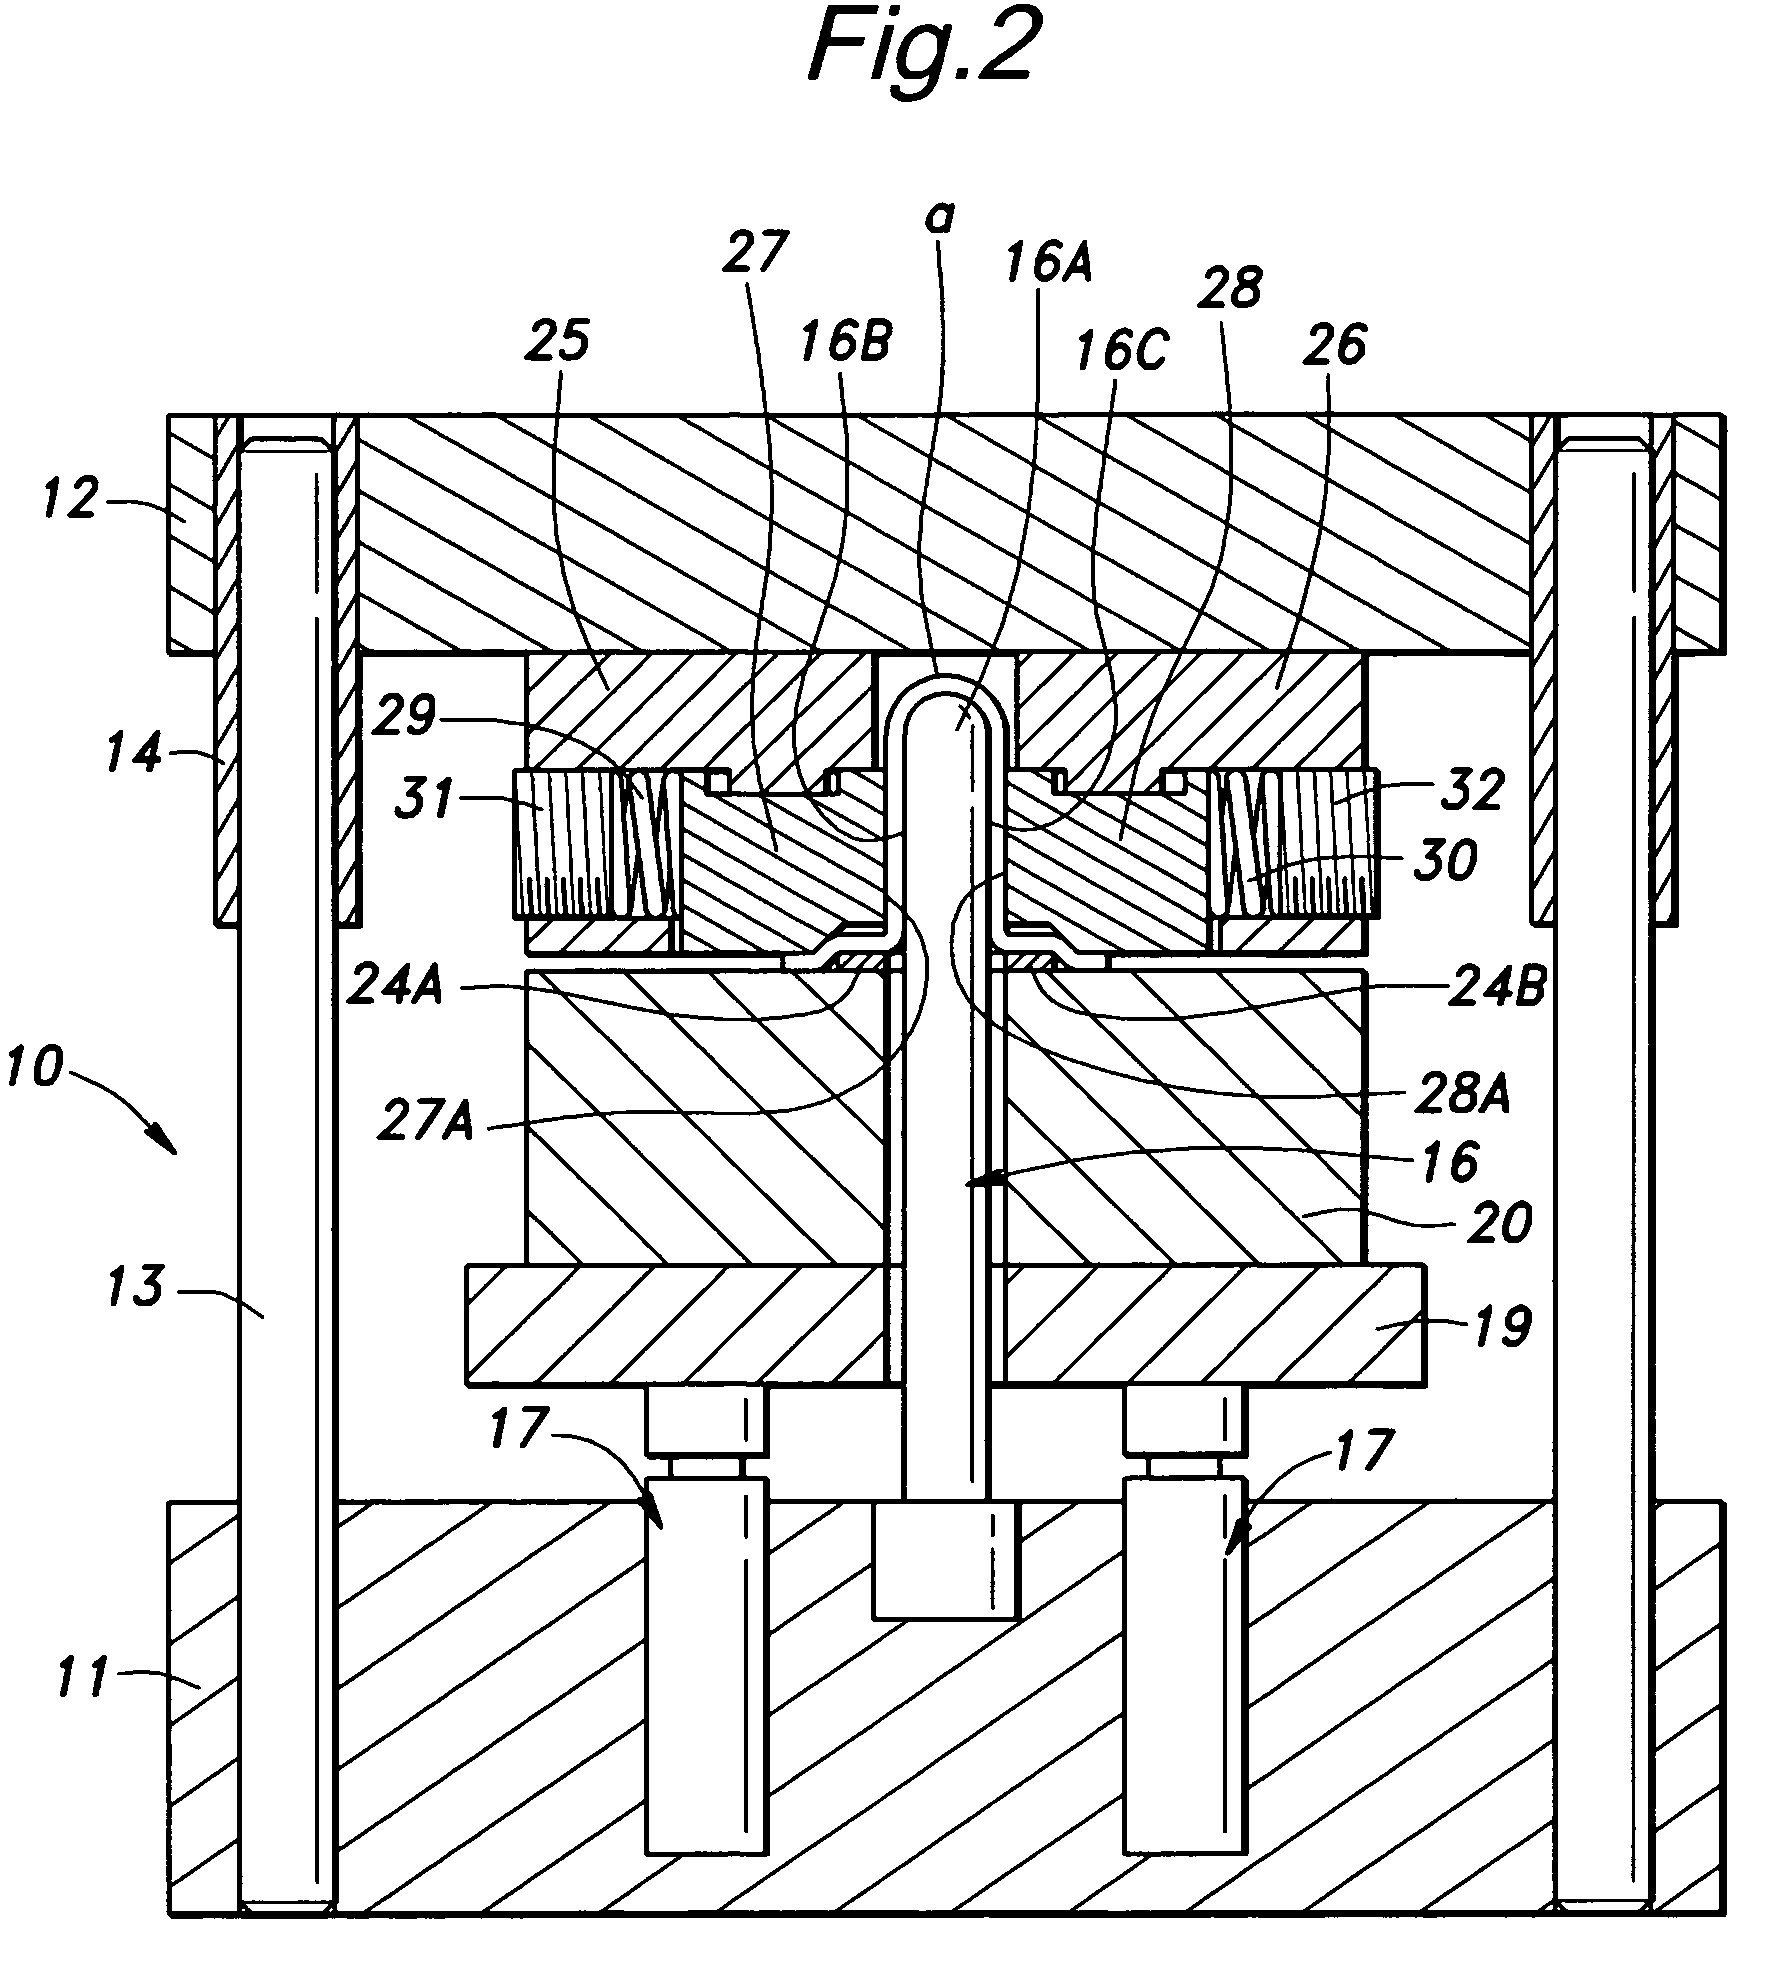 Method for manufacturing an edge protector and die assemblies therefor